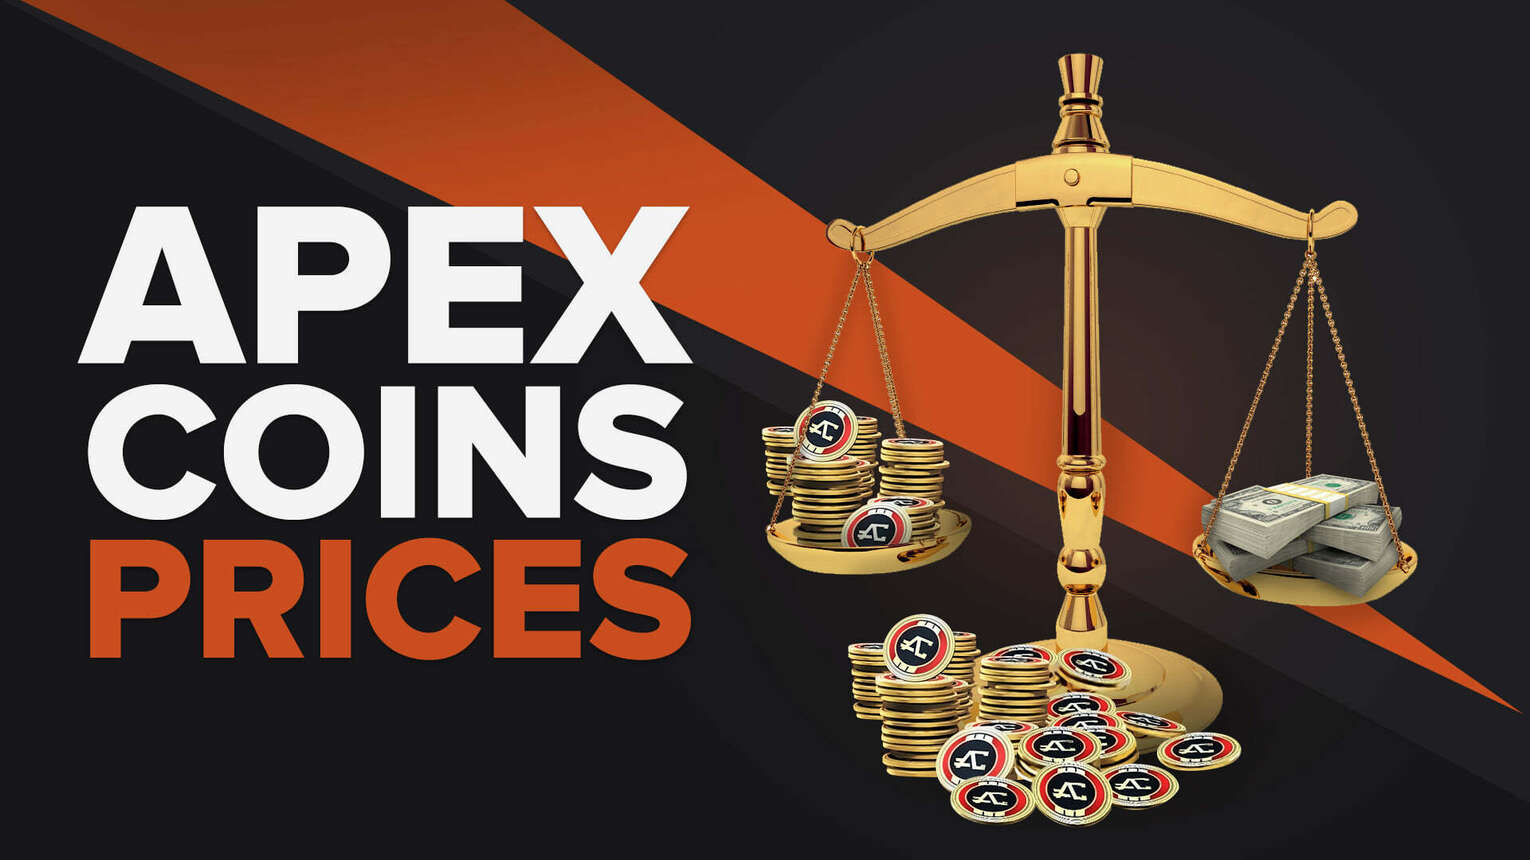 Apex Coins in Apex Legends (Prices, how to get, etc...)